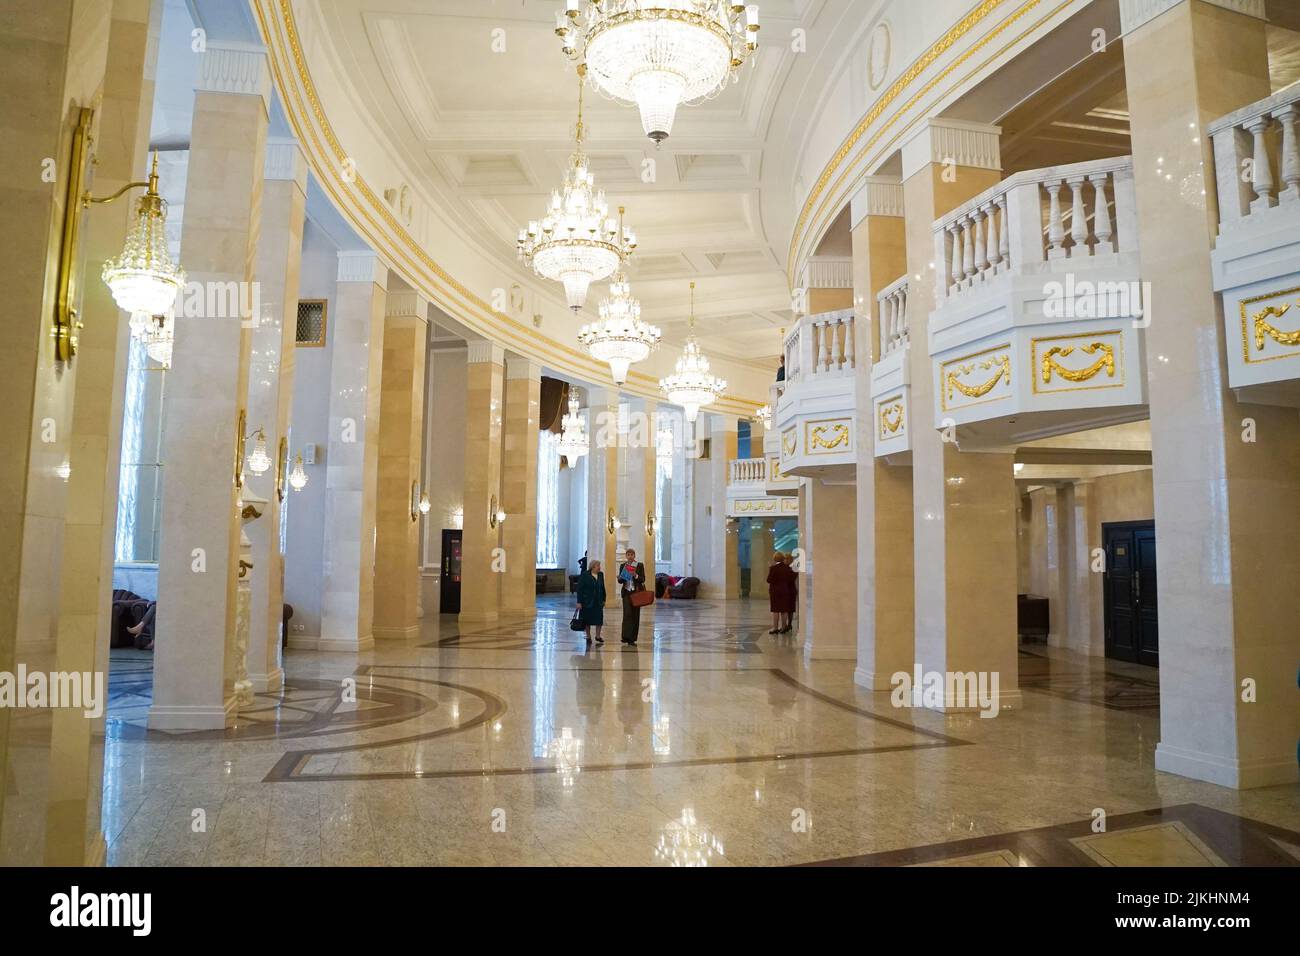 The interior of the National Academic Grand Opera and Ballet Theatre of the Republic of Belarus Stock Photo